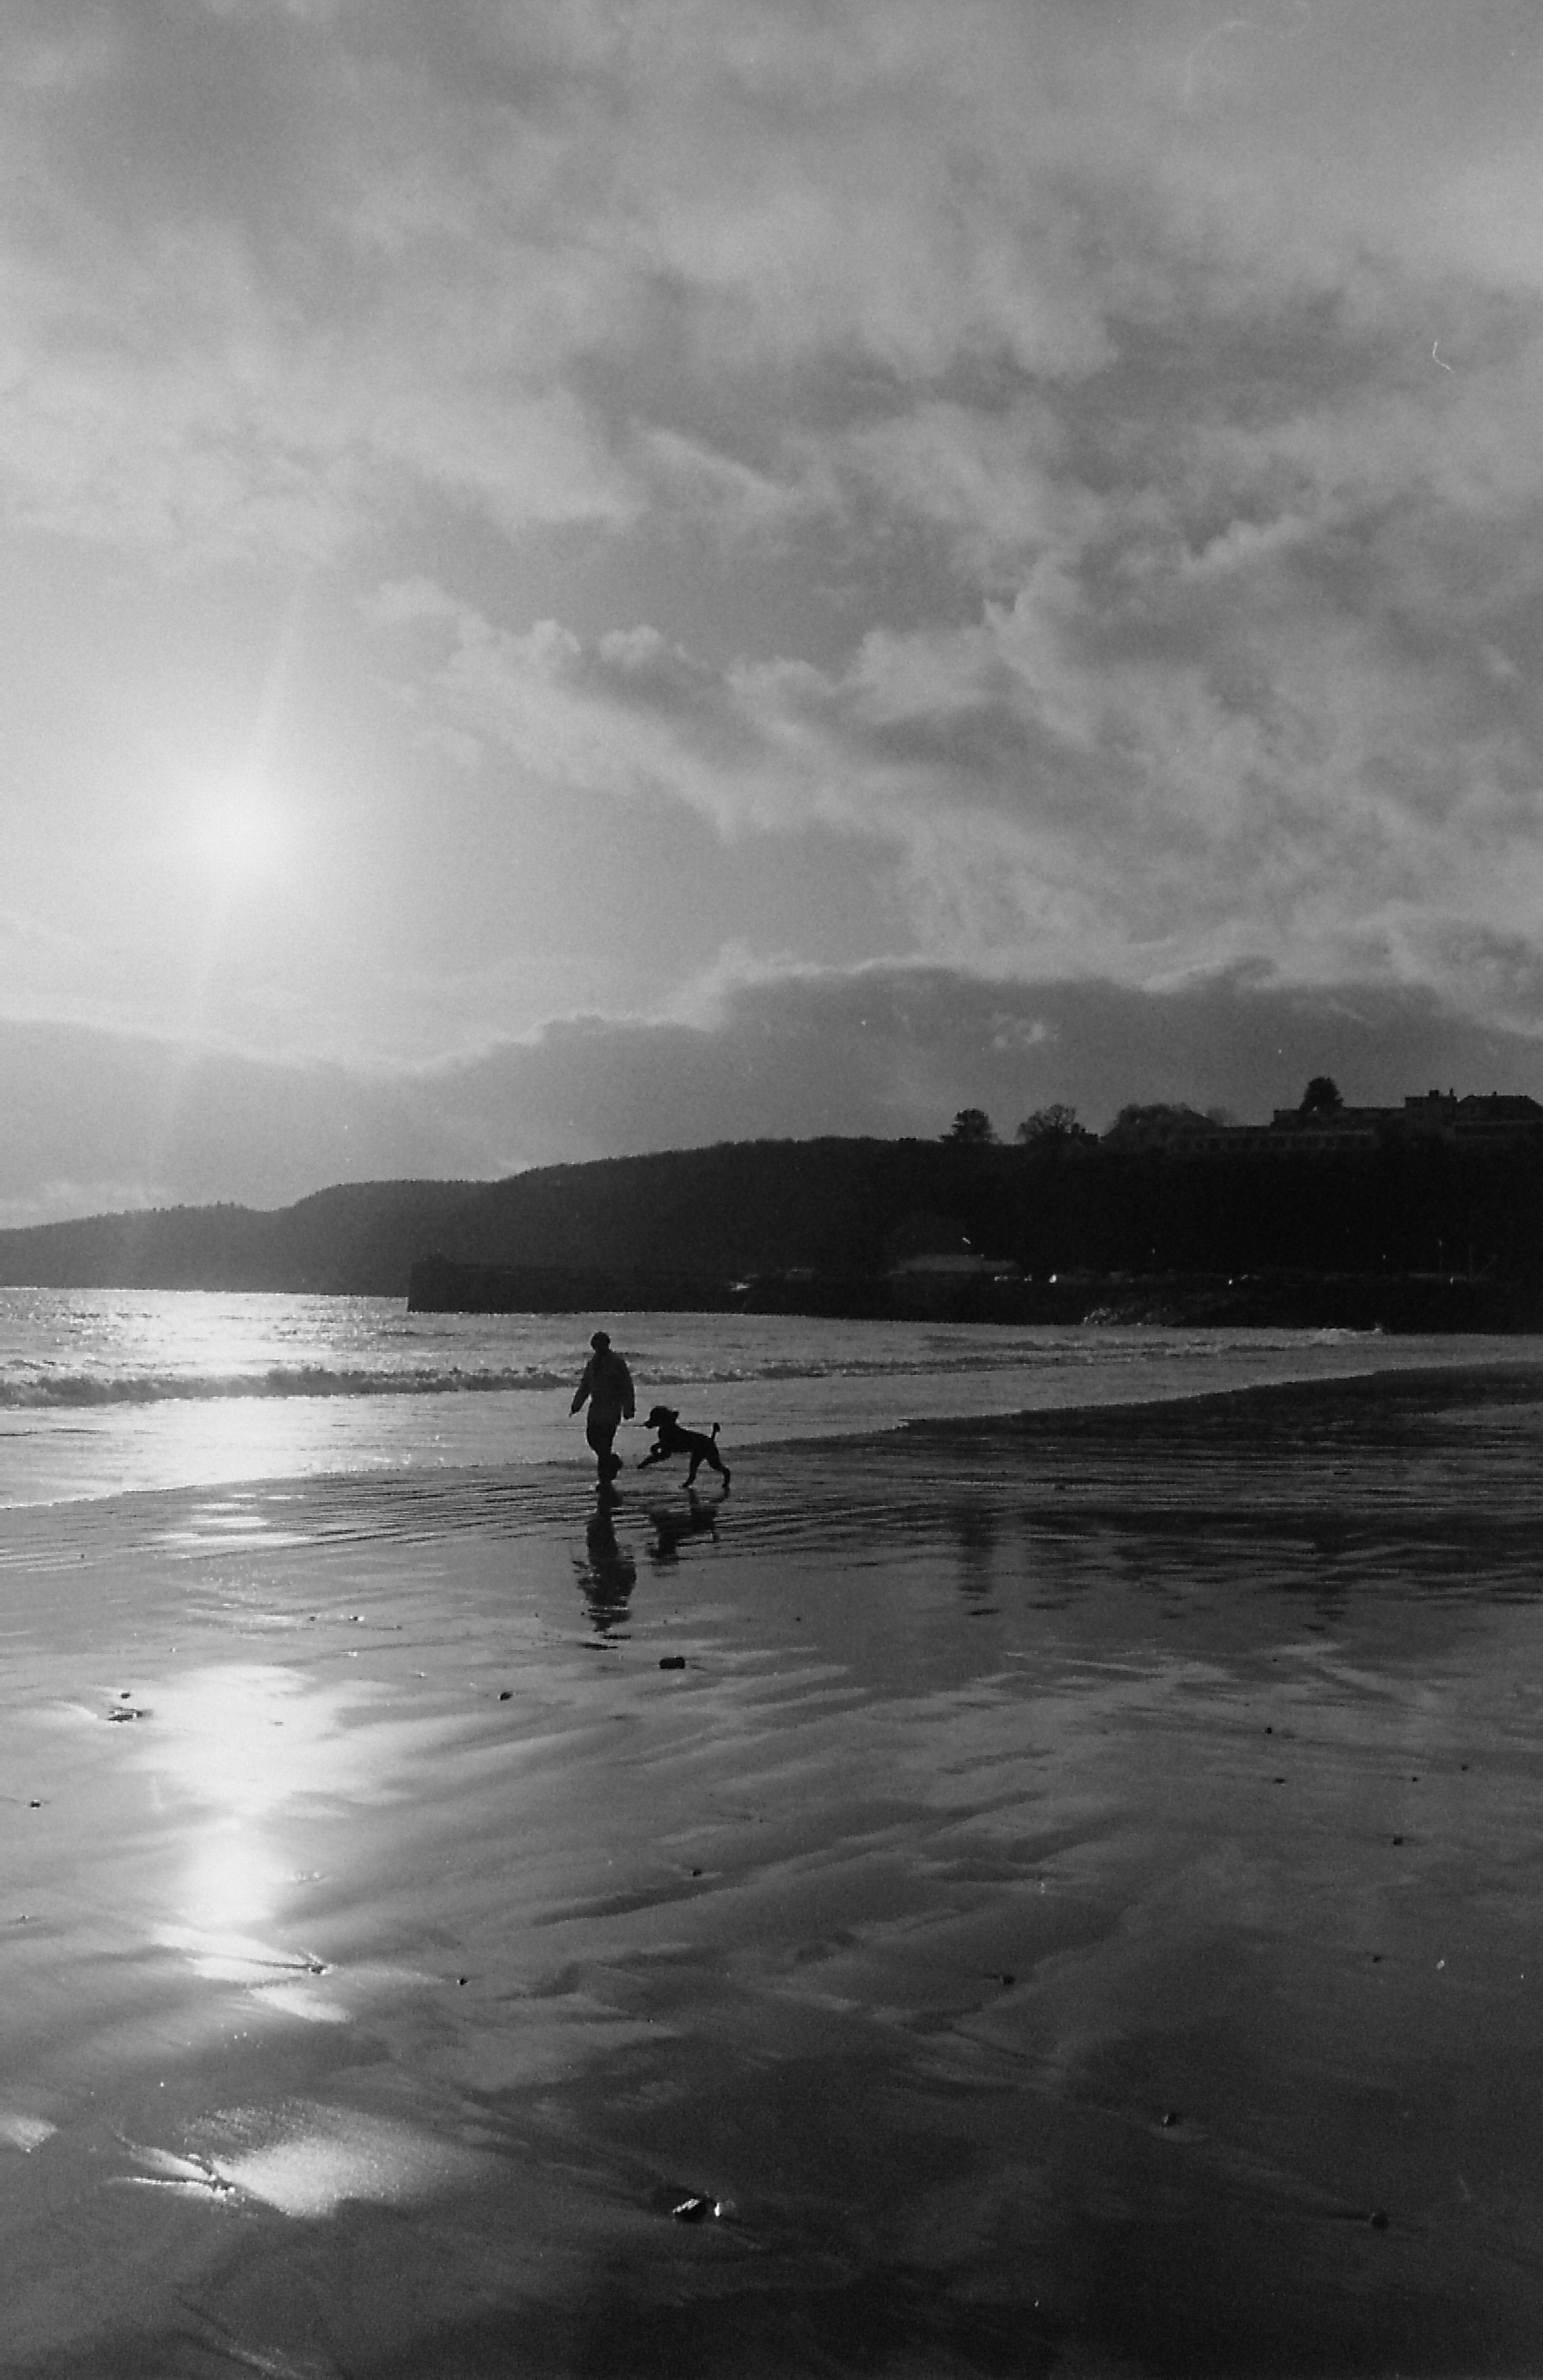 E0000914_Dog on the beach.JPG   /guest/guest/Images/Saundersfoot/E0000914_Dog on the beach.JPG